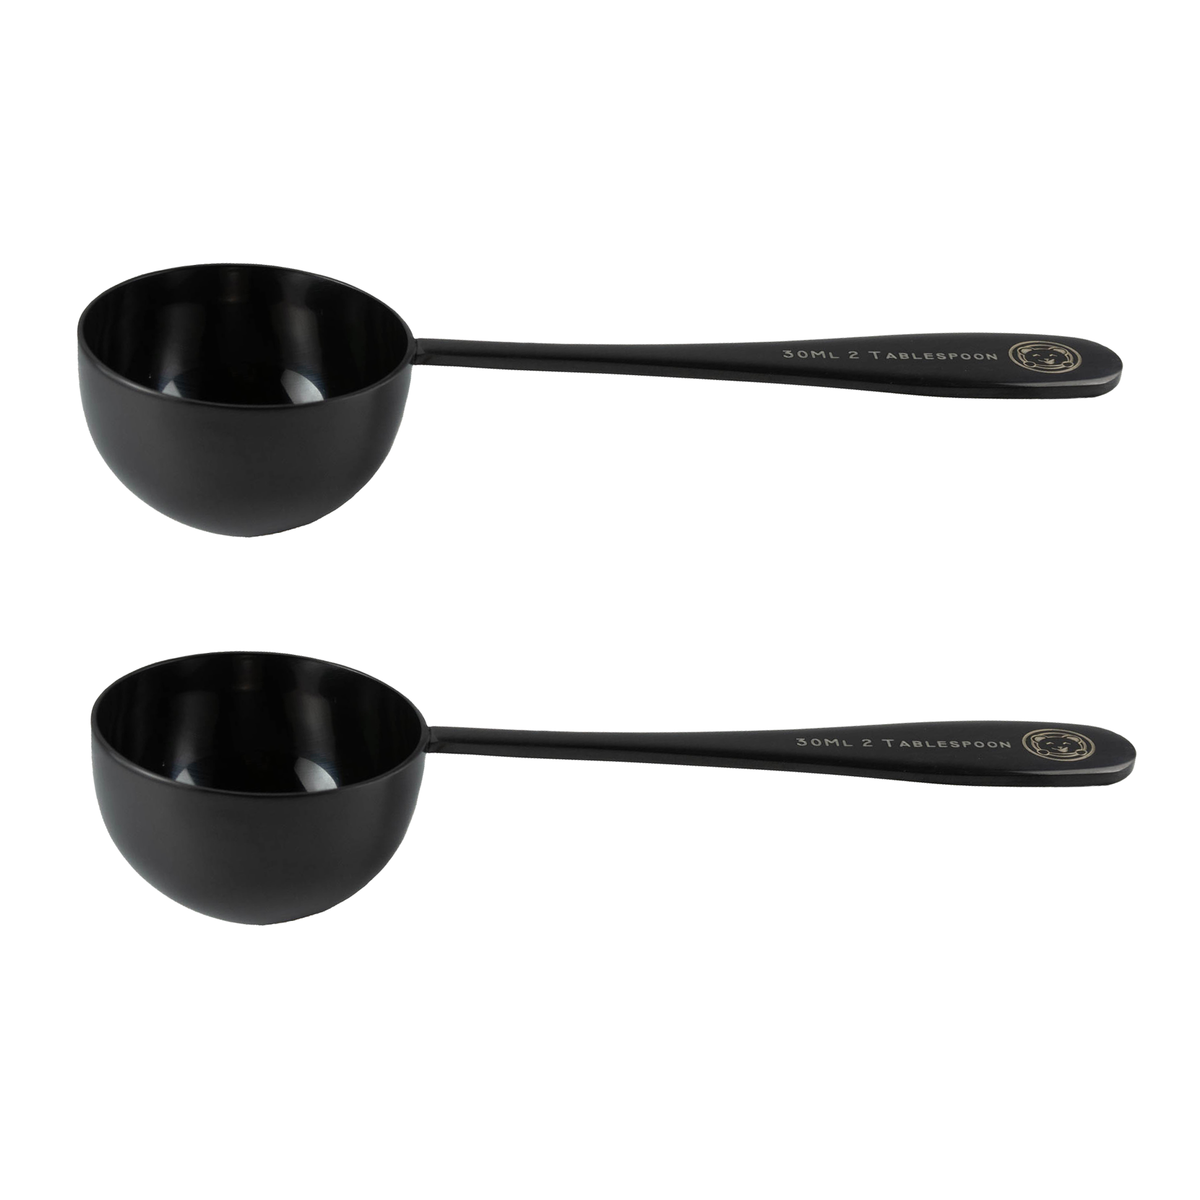 Cupping Spoon, Soup Spoons, Durable And Sturdy Kitchen Tool For